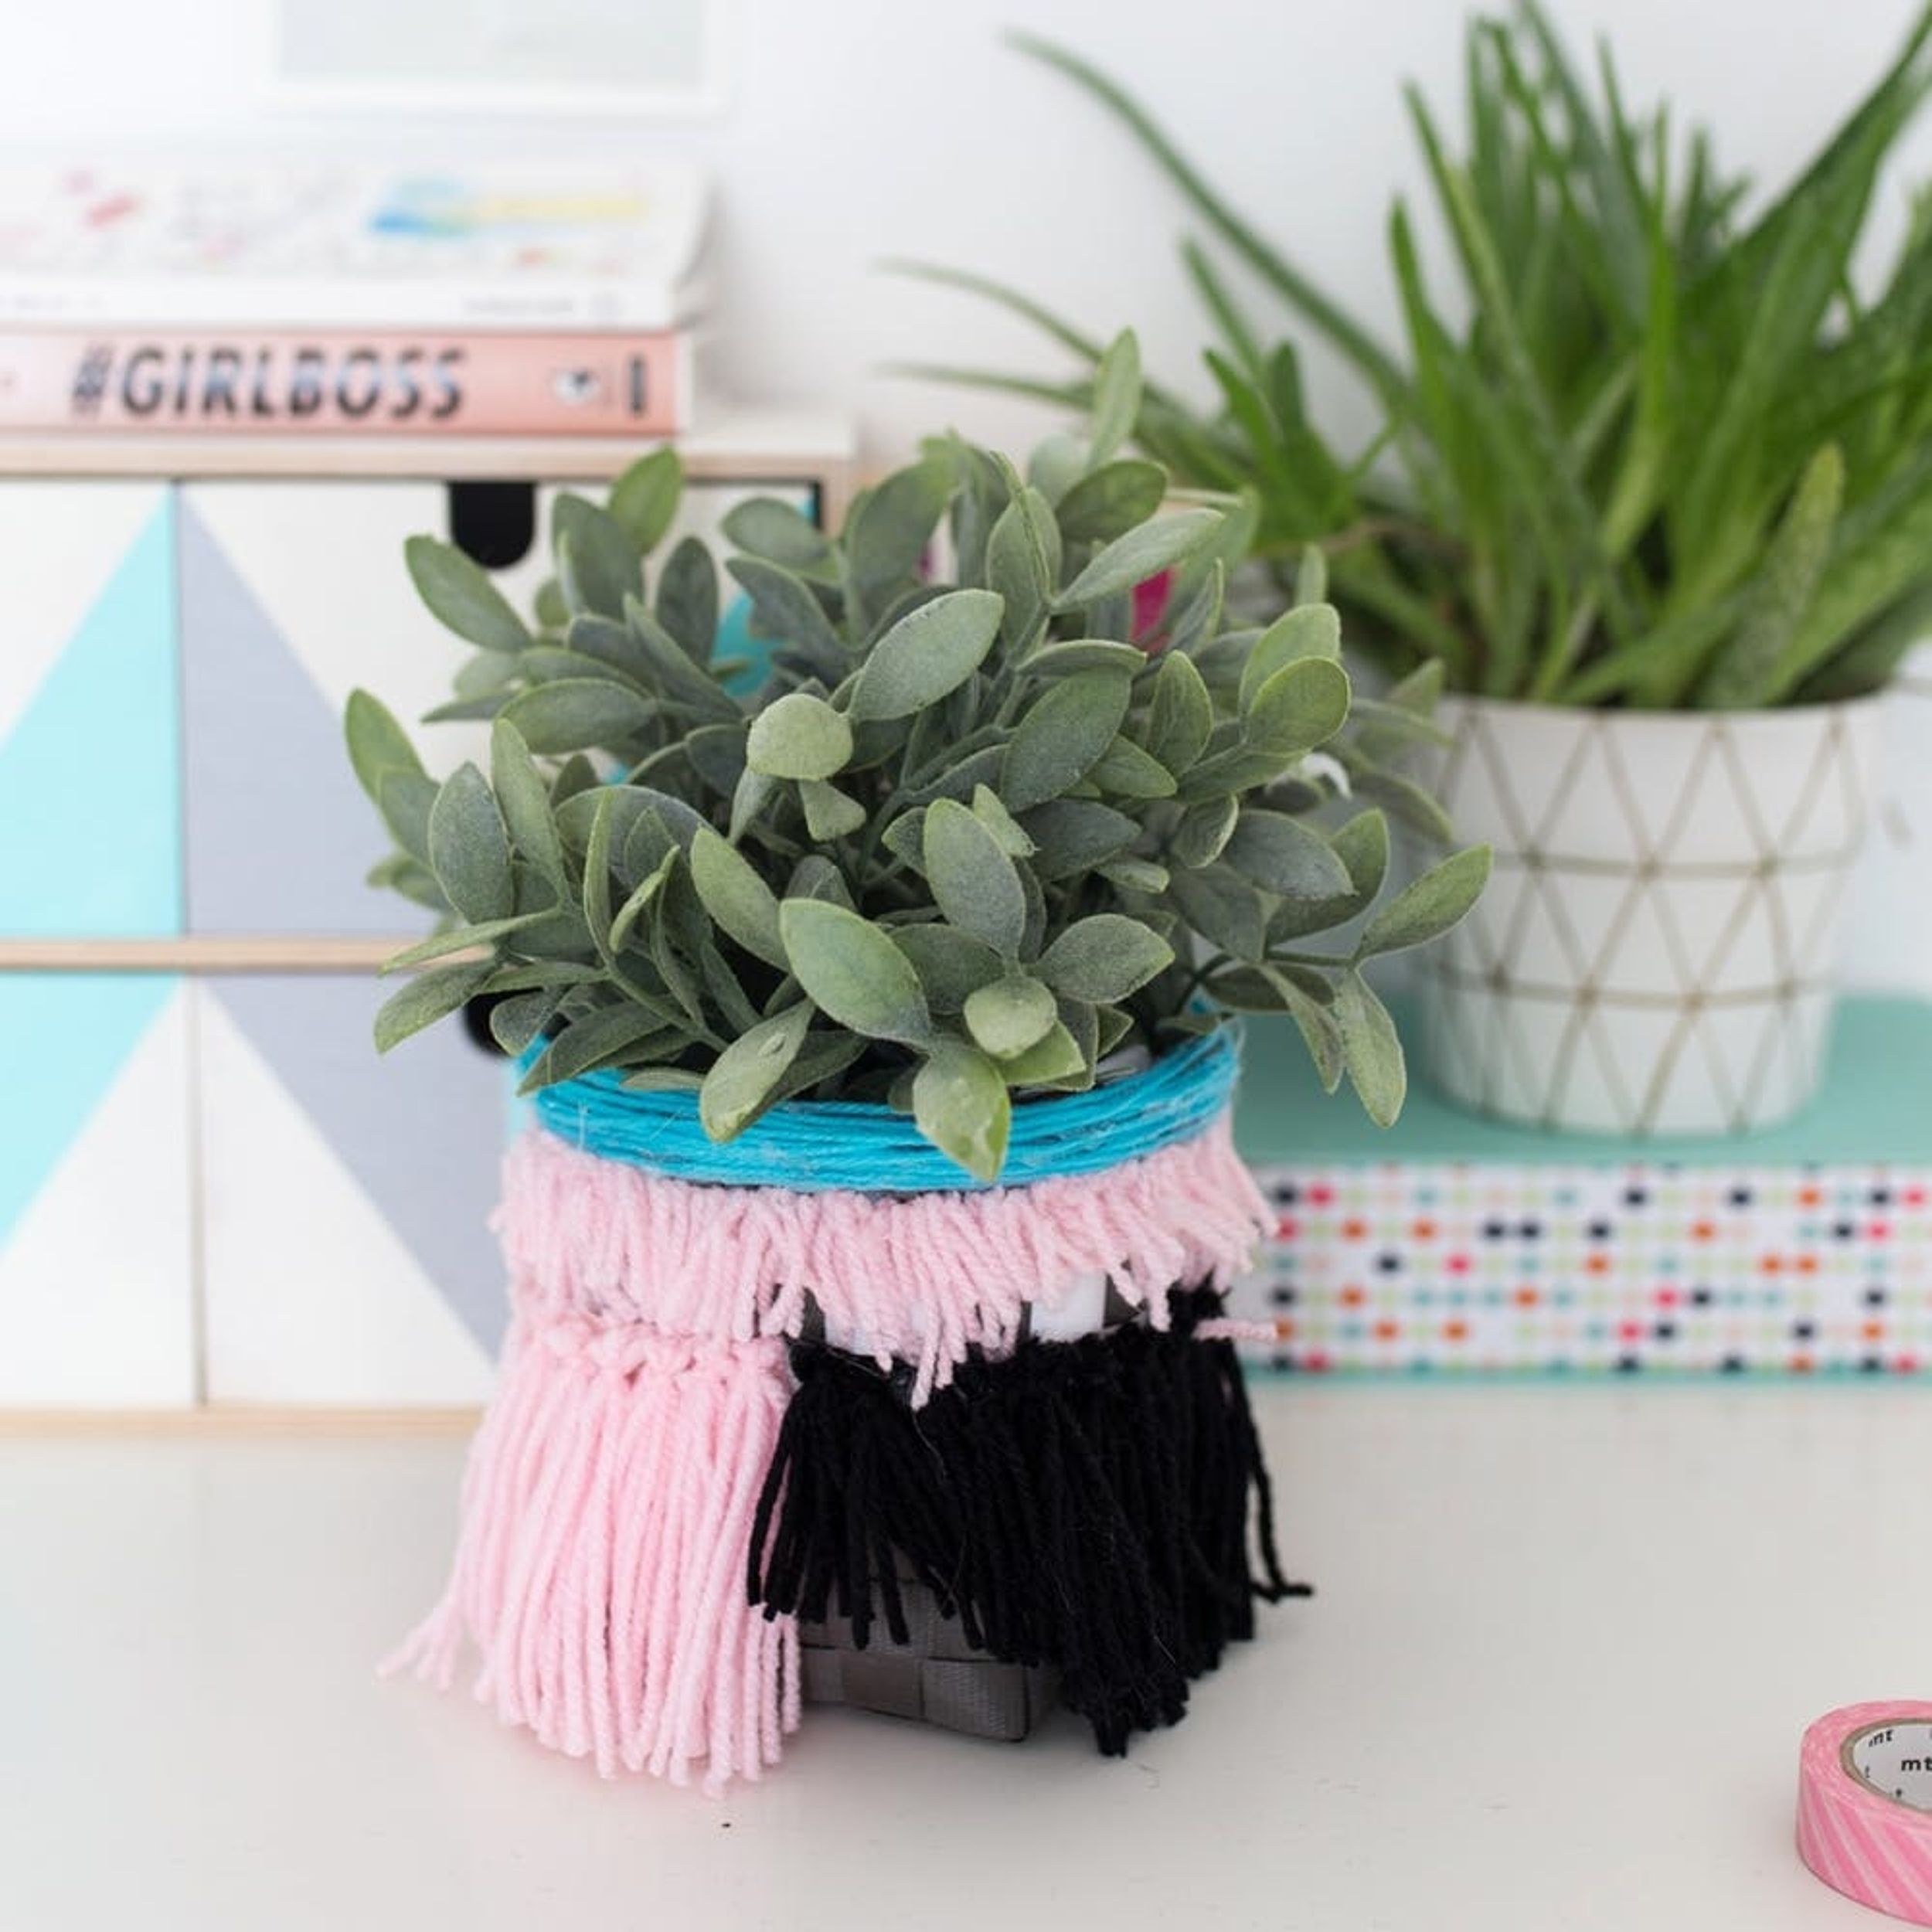 Keep Your Home Office Organized With This DIY Anthro-Inspired Tasseled Basket